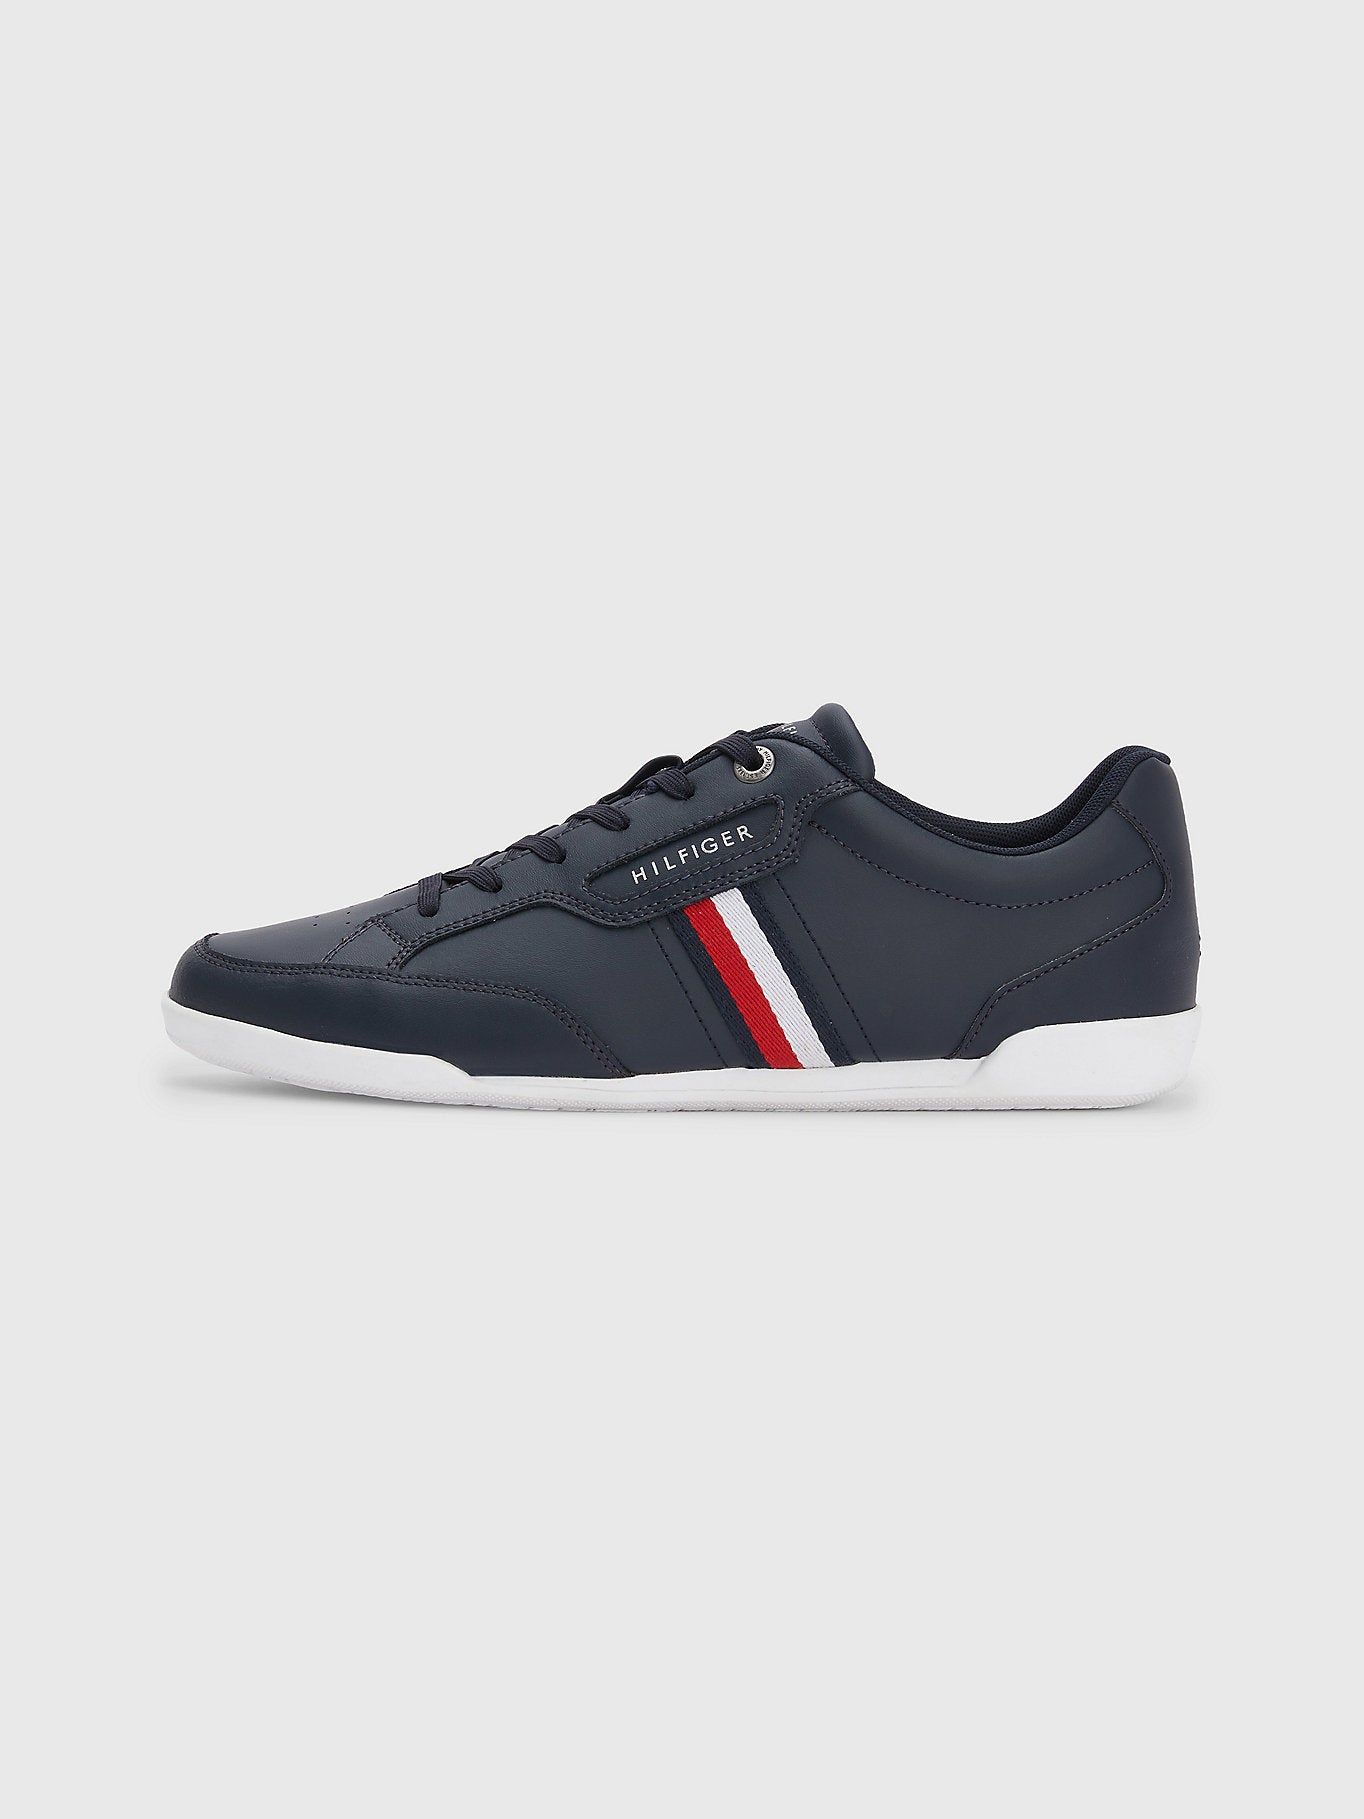 TOMMY HILFIGER SIGNATURE LEATHER CUPSOLE TRAINERS